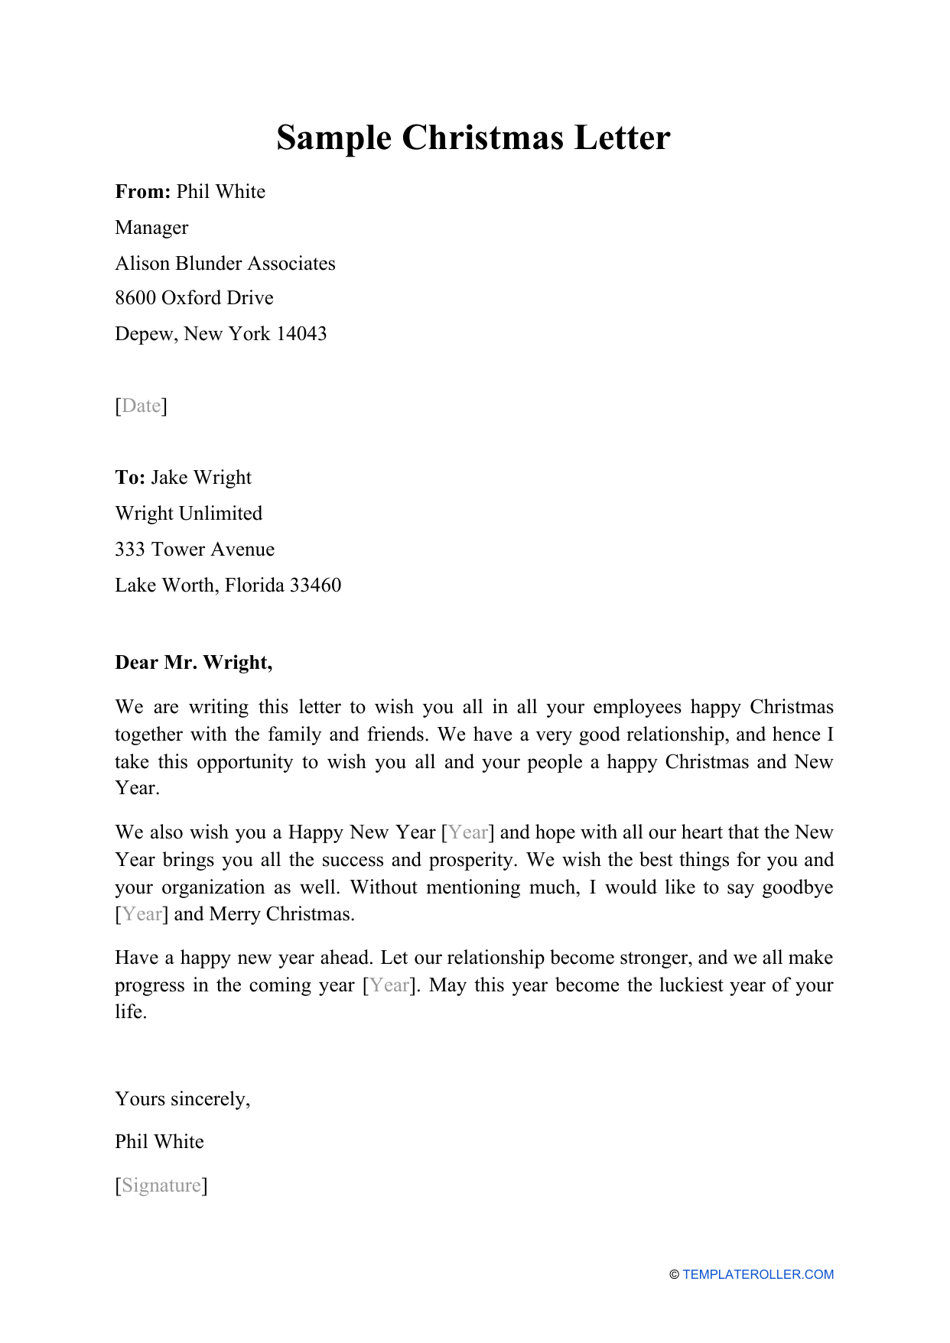 Sample Christmas Letter Document Preview